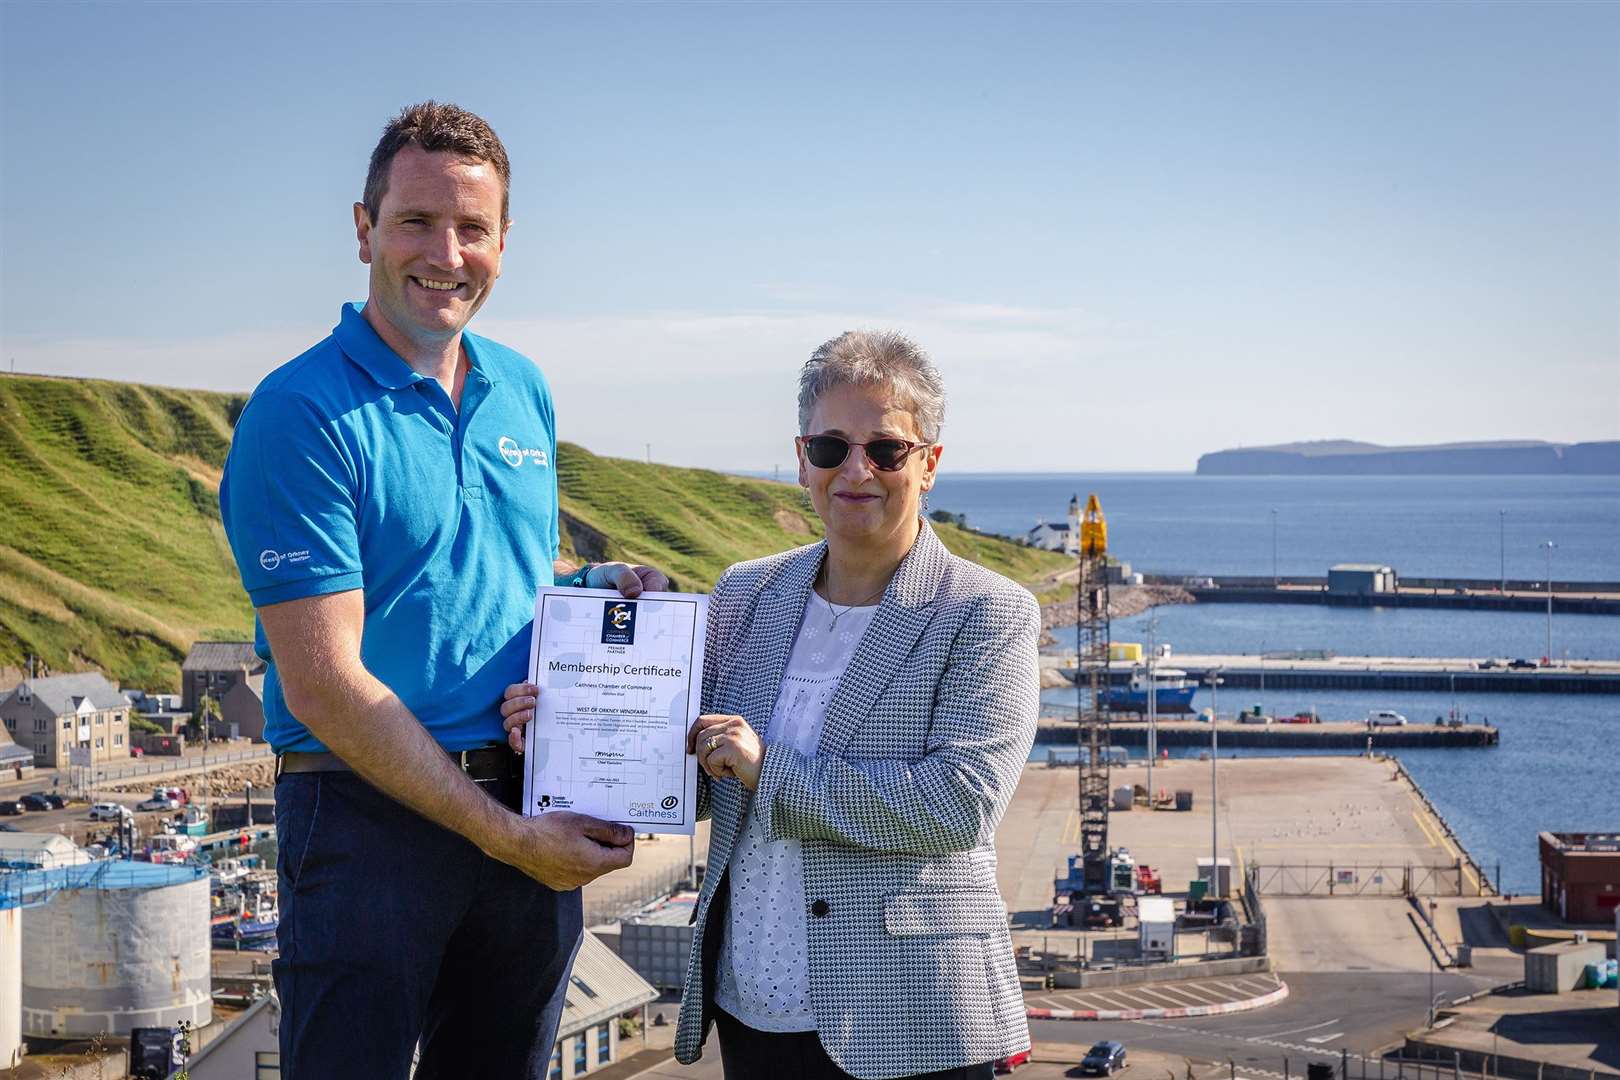 Jack Farnham development manager for West of Orkney Windfarm, with Trudy Morris, CEO of Caithness Chamber of Commerce at Scrabster Harbour.